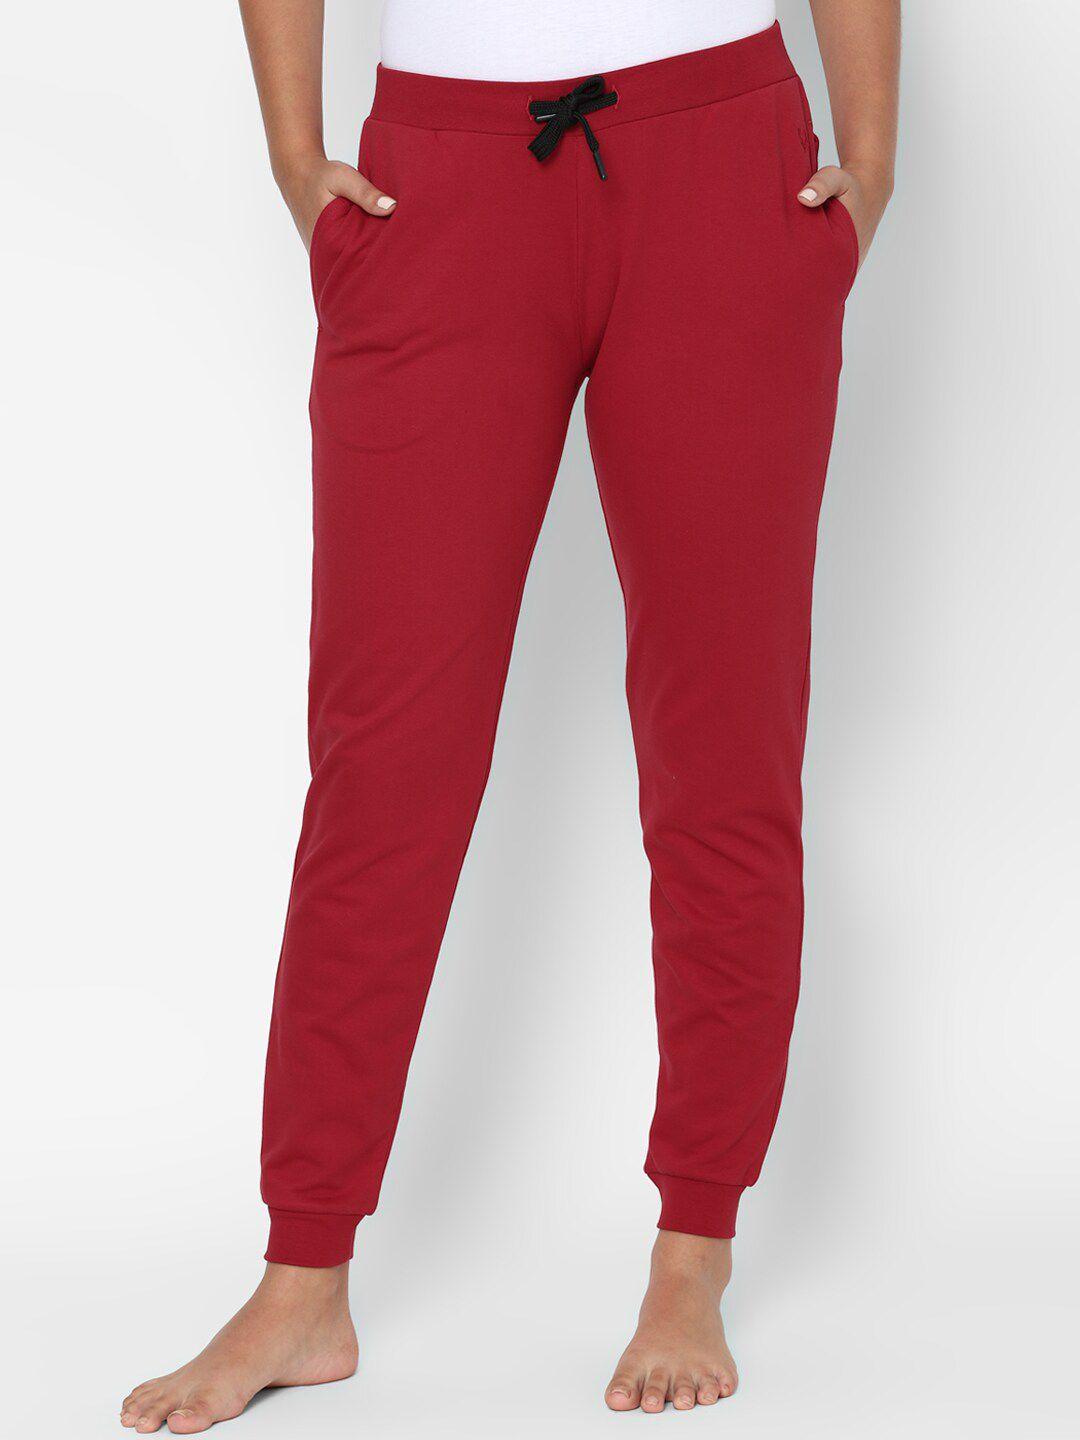 allen-solly-woman-women-red-solid-pure-cotton-lounge-joggers